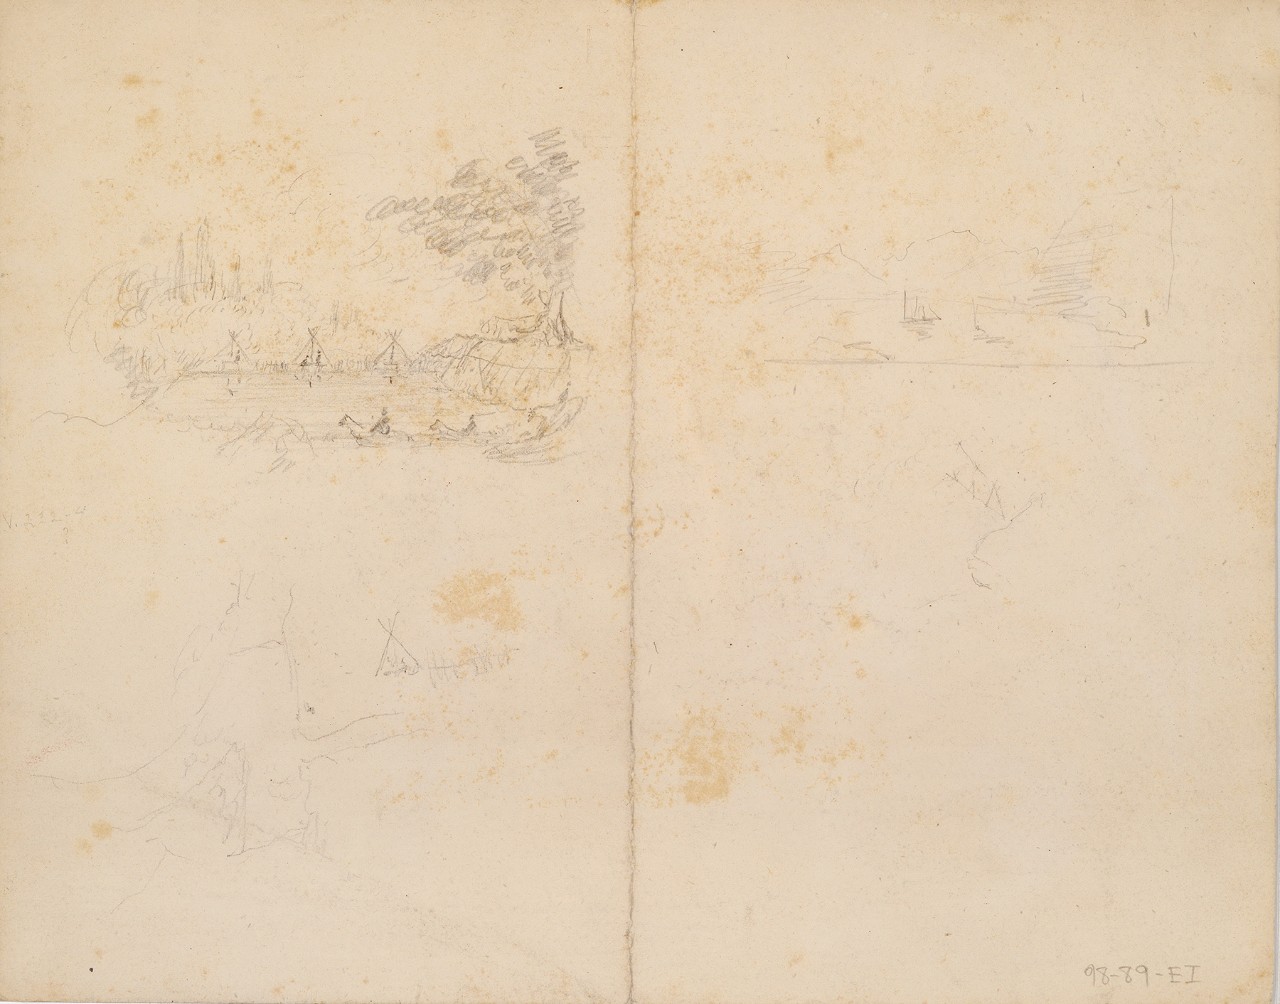 Several sketches of tents and men on horseback